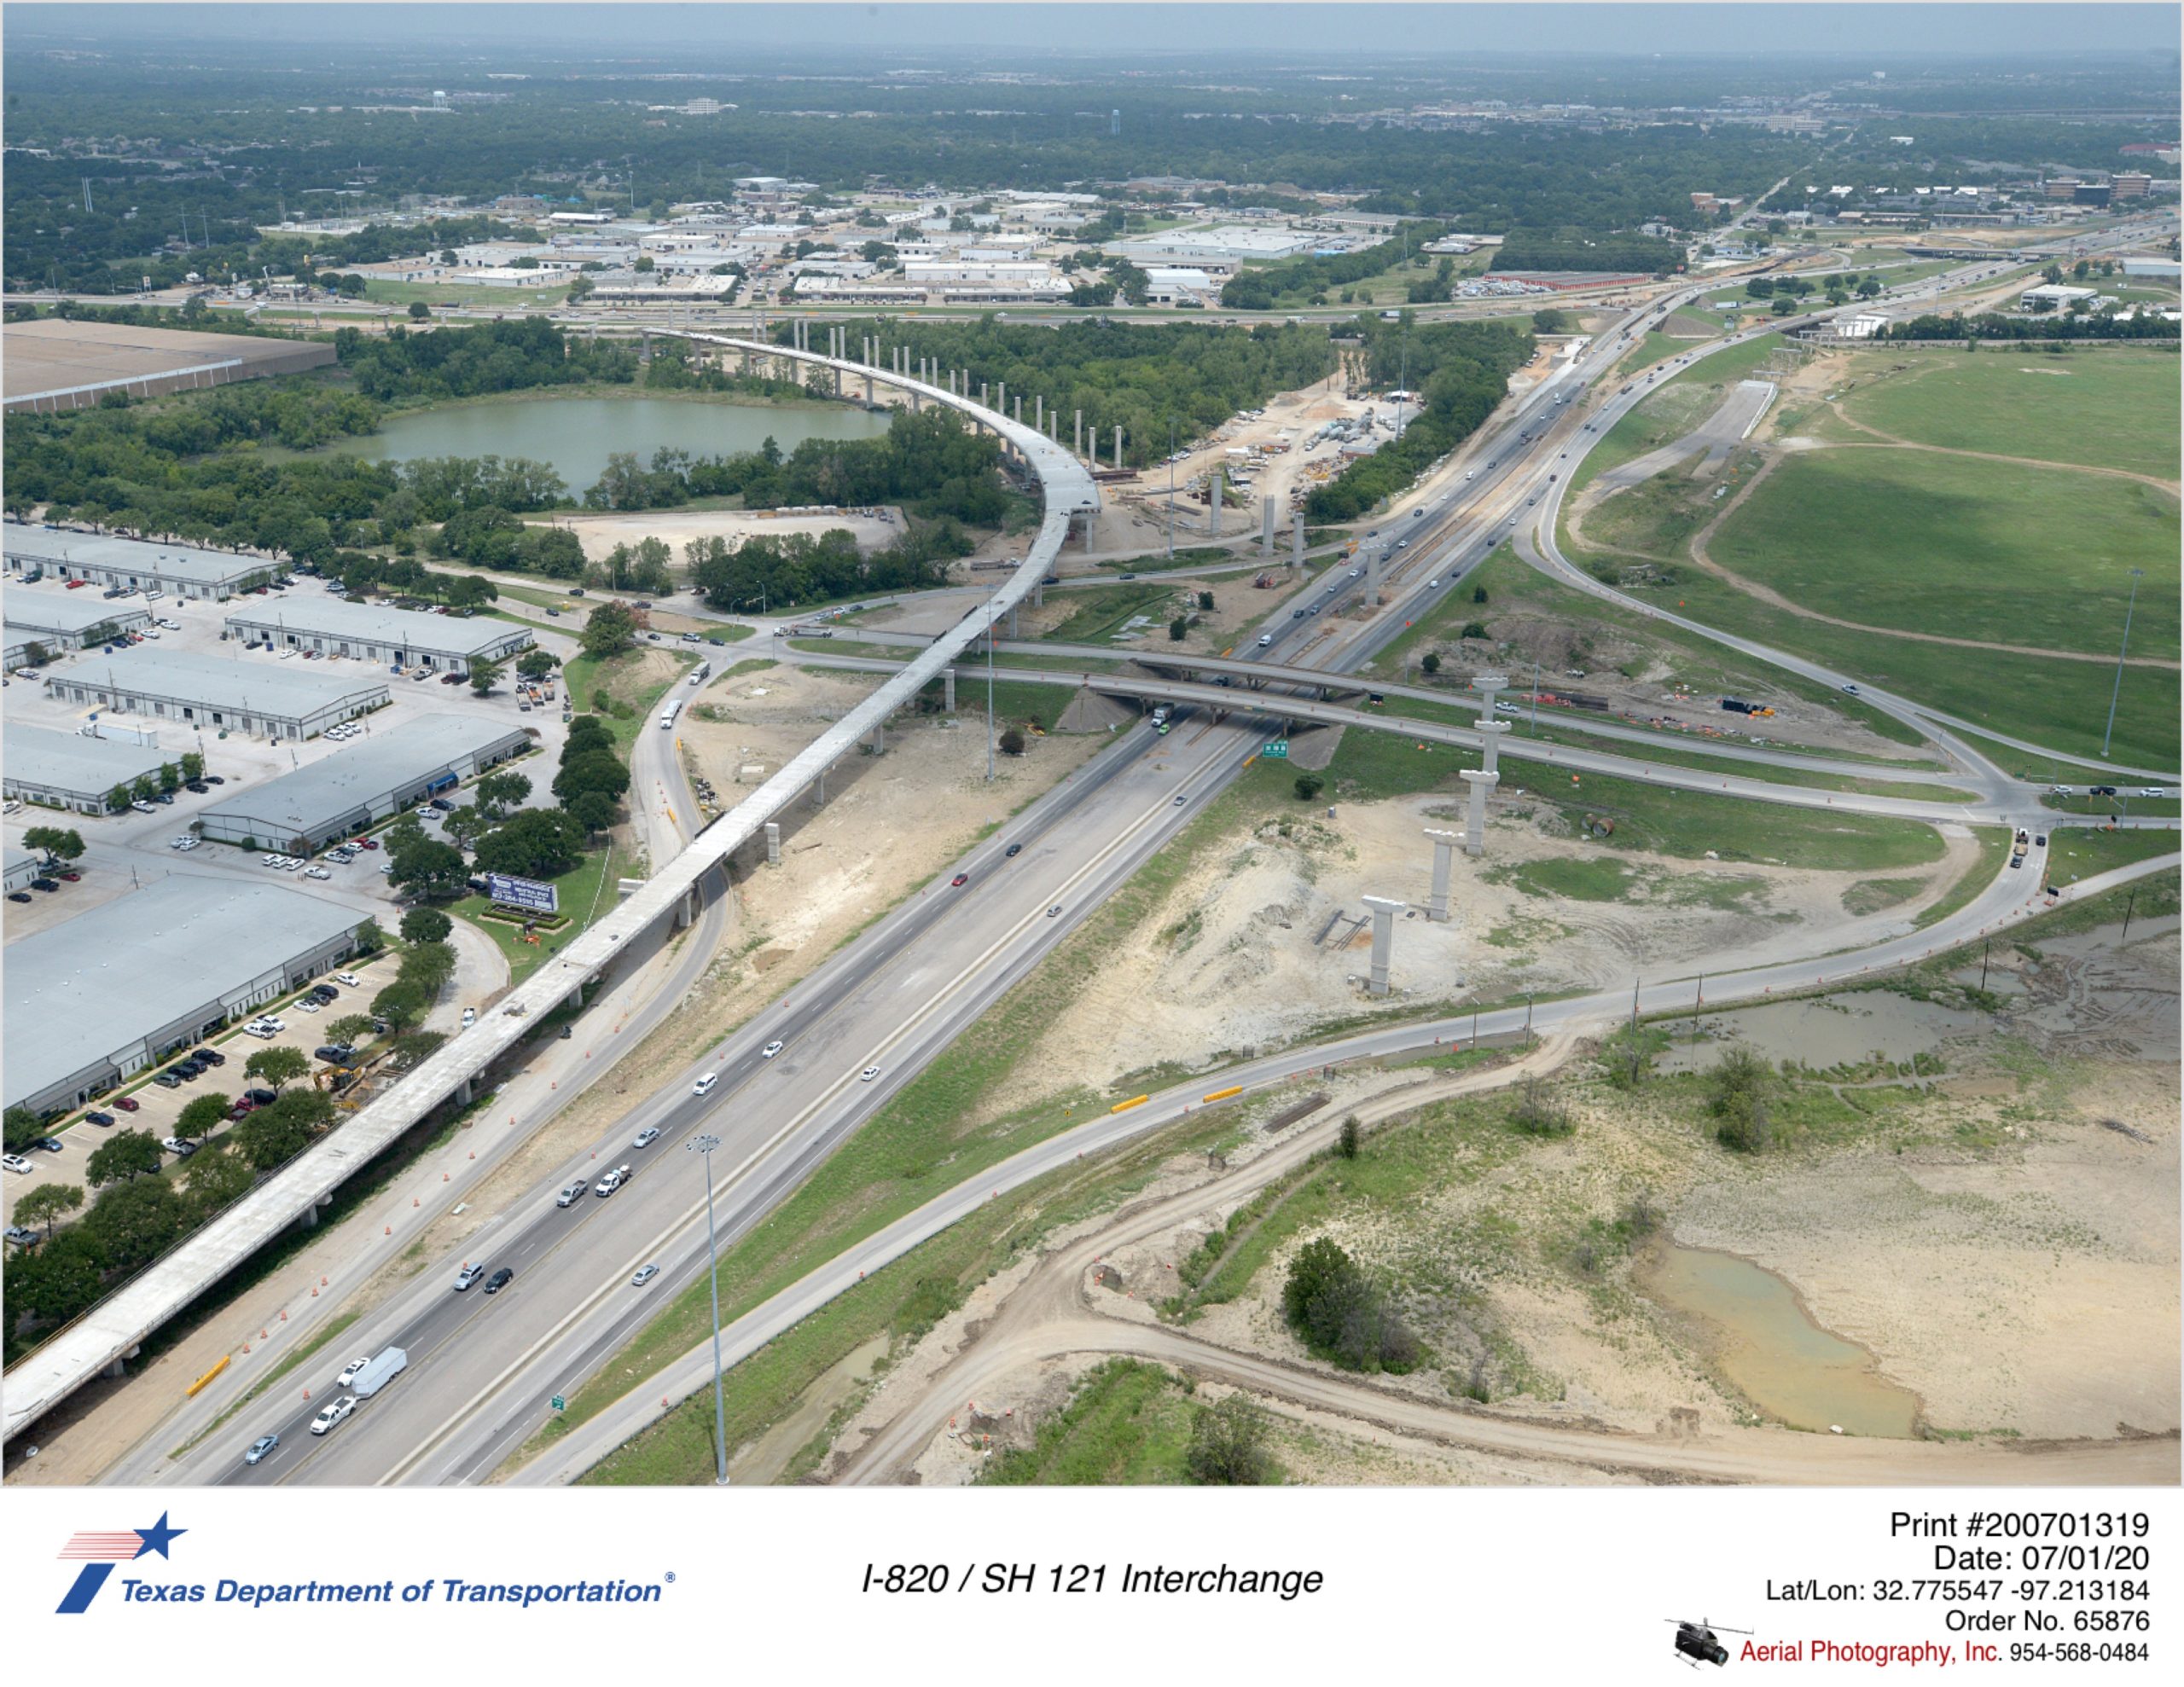 Looking northwest at I-820/Trinity Blvd interchange. Construction of new direct connector bridge to SH 1121 shown.